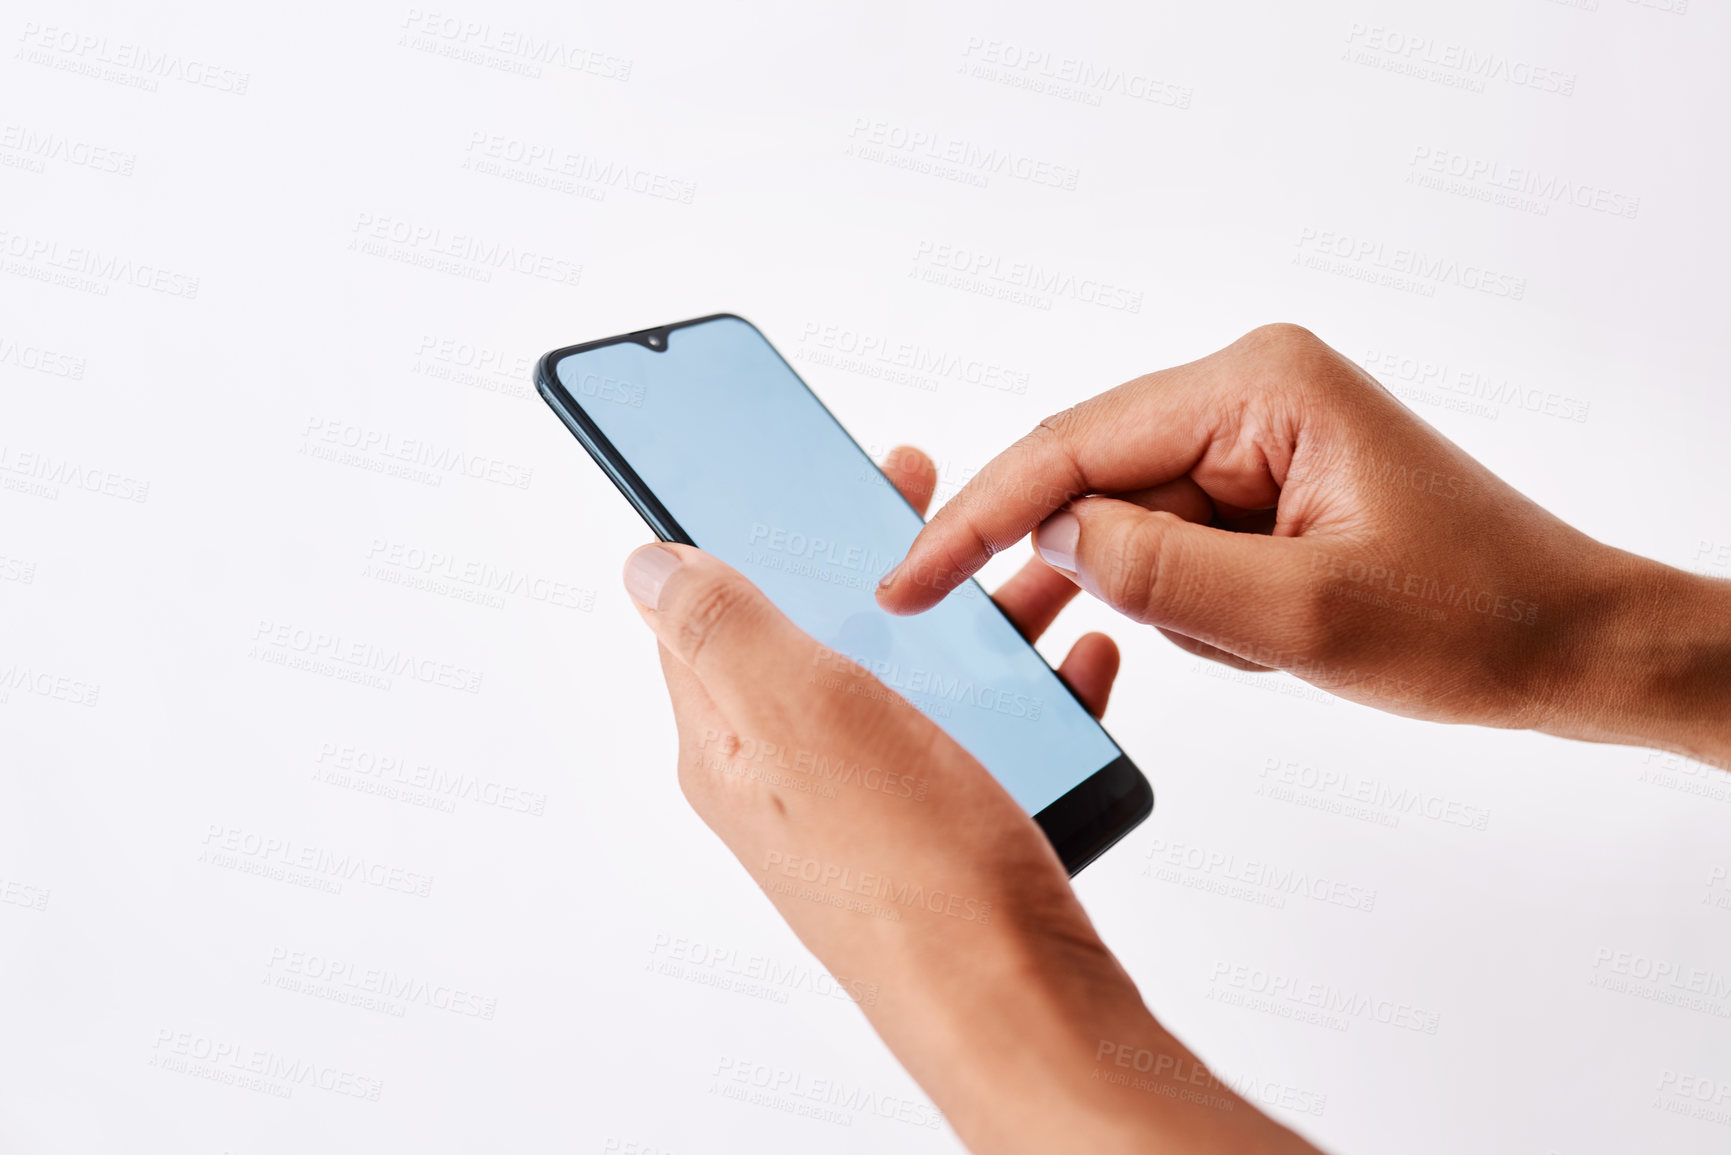 Buy stock photo Studio shot of an unrecognizable woman holding a cellphone against a white background